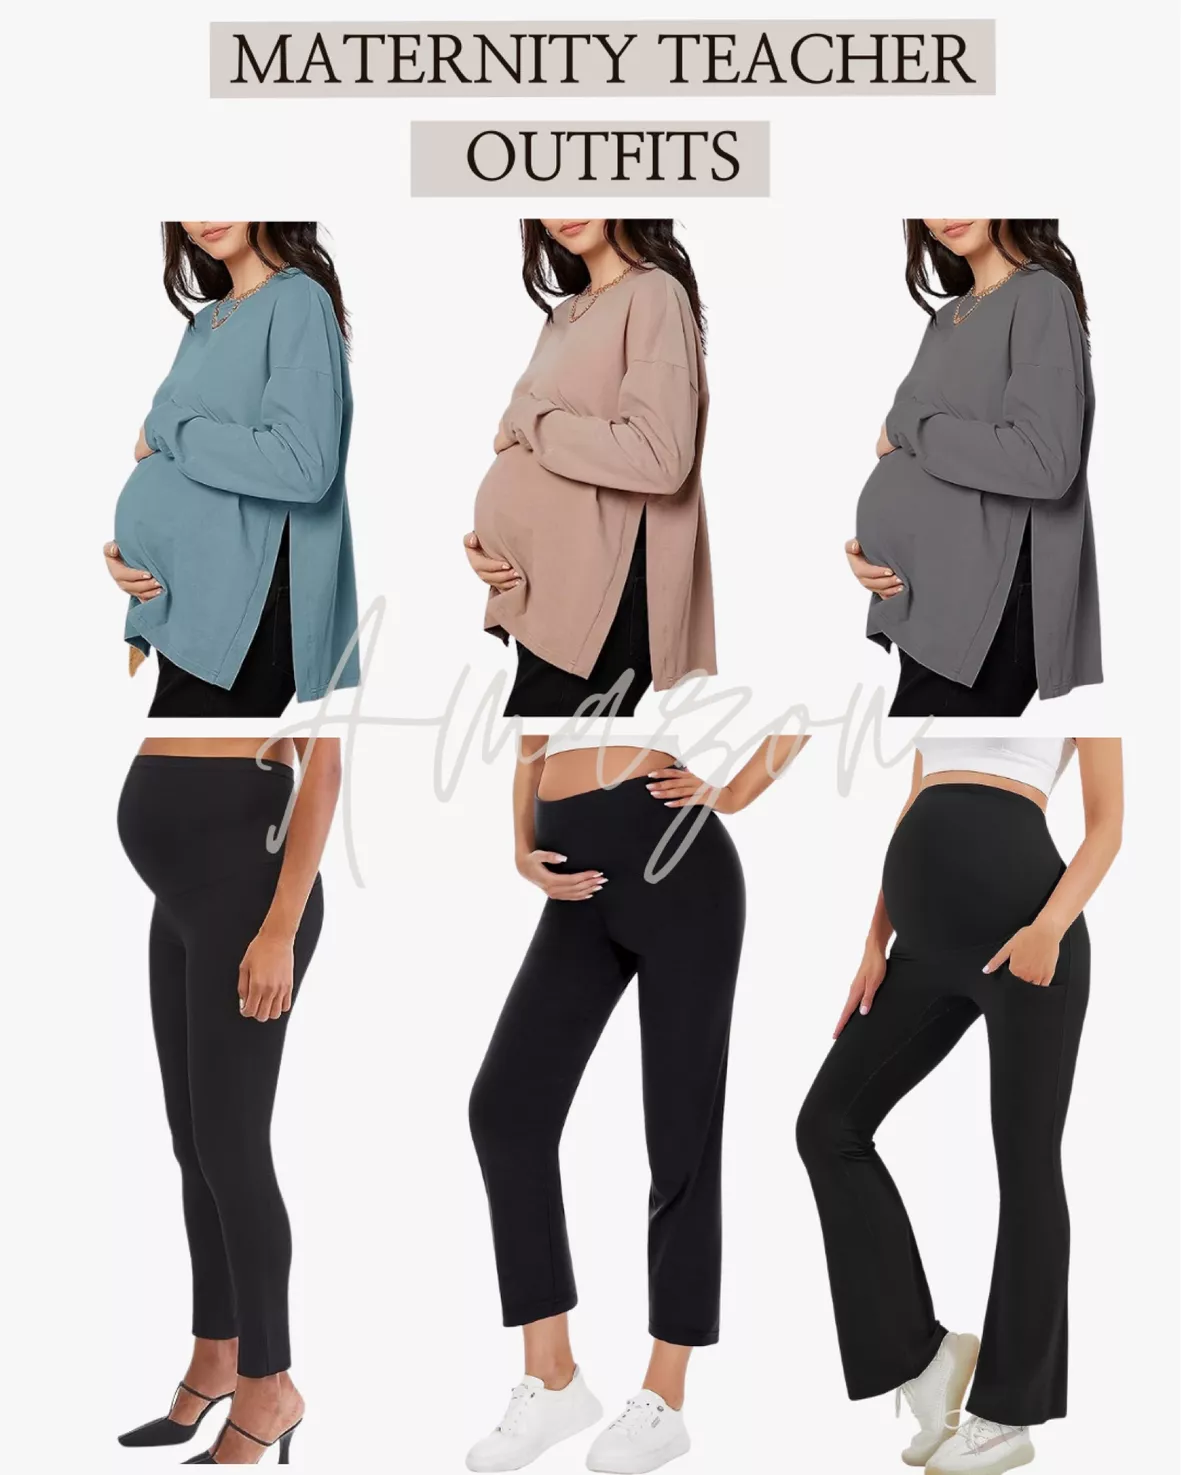  HEGALY Womens Maternity Flare Leggings Over The Belly -  Casual Pregnancy Yoga Pants